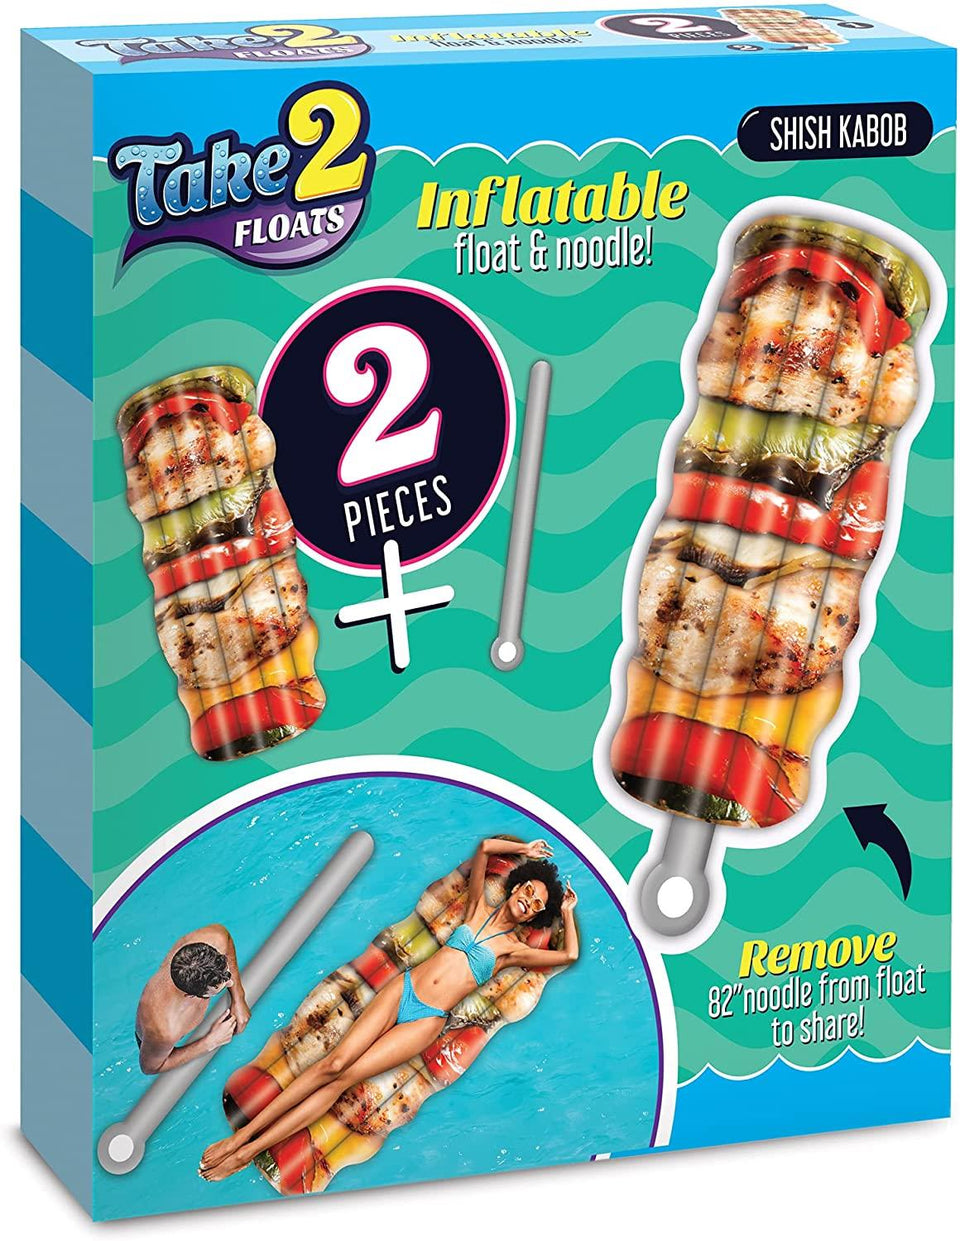 Chicken Shish Kebab Float & Noodle 2-in-1 Pool Floats Raft Tube Inflatable Mighty Mojo